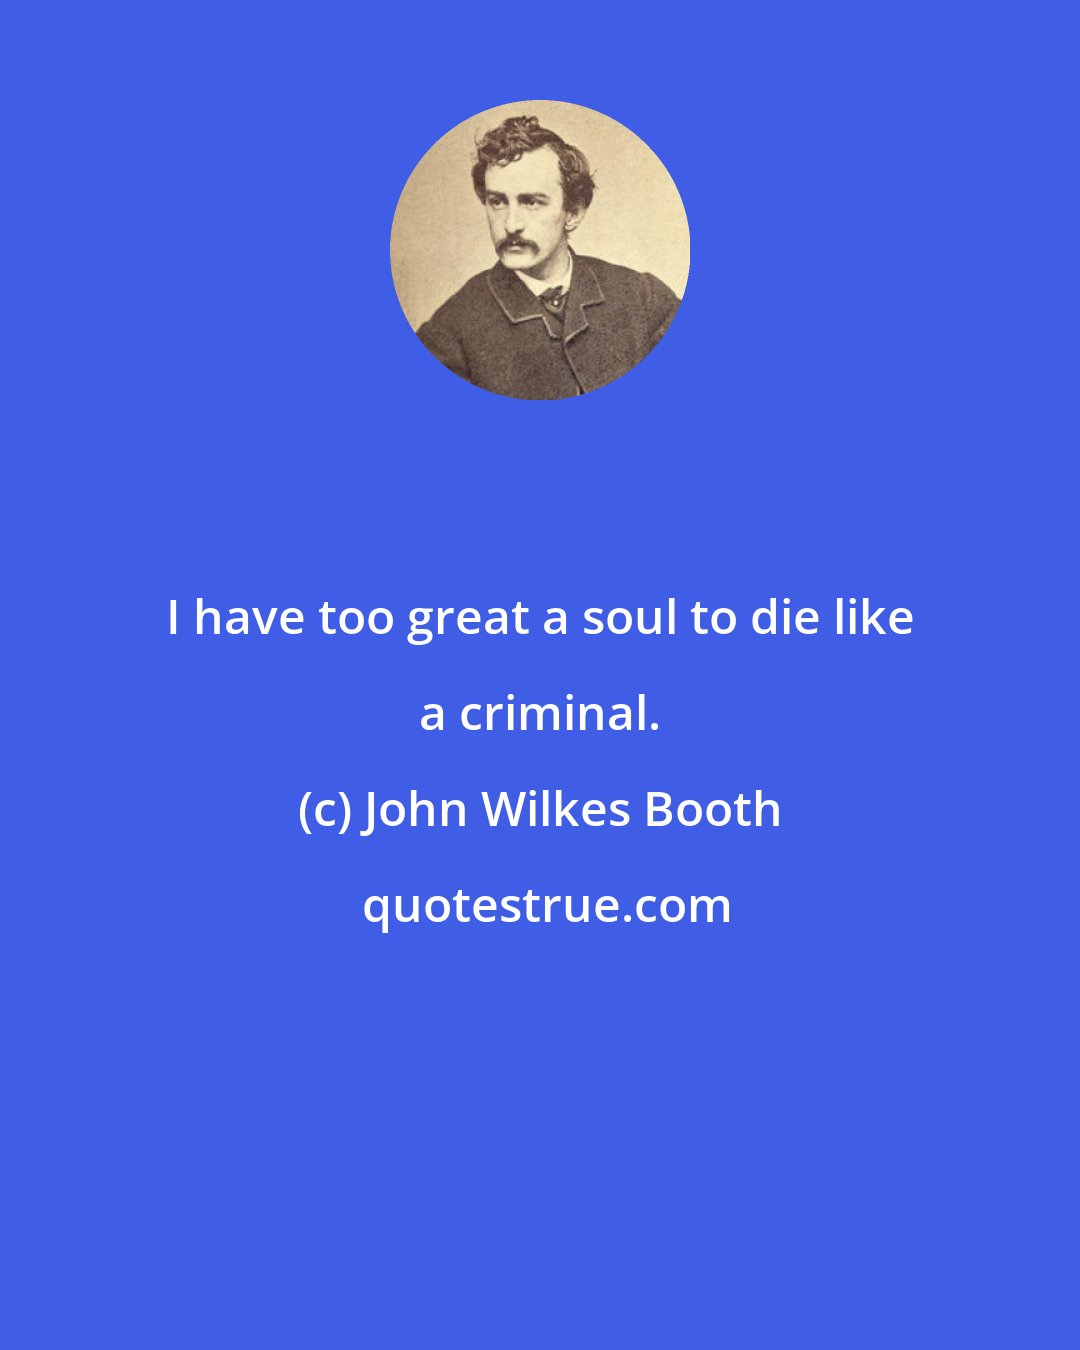 John Wilkes Booth: I have too great a soul to die like a criminal.